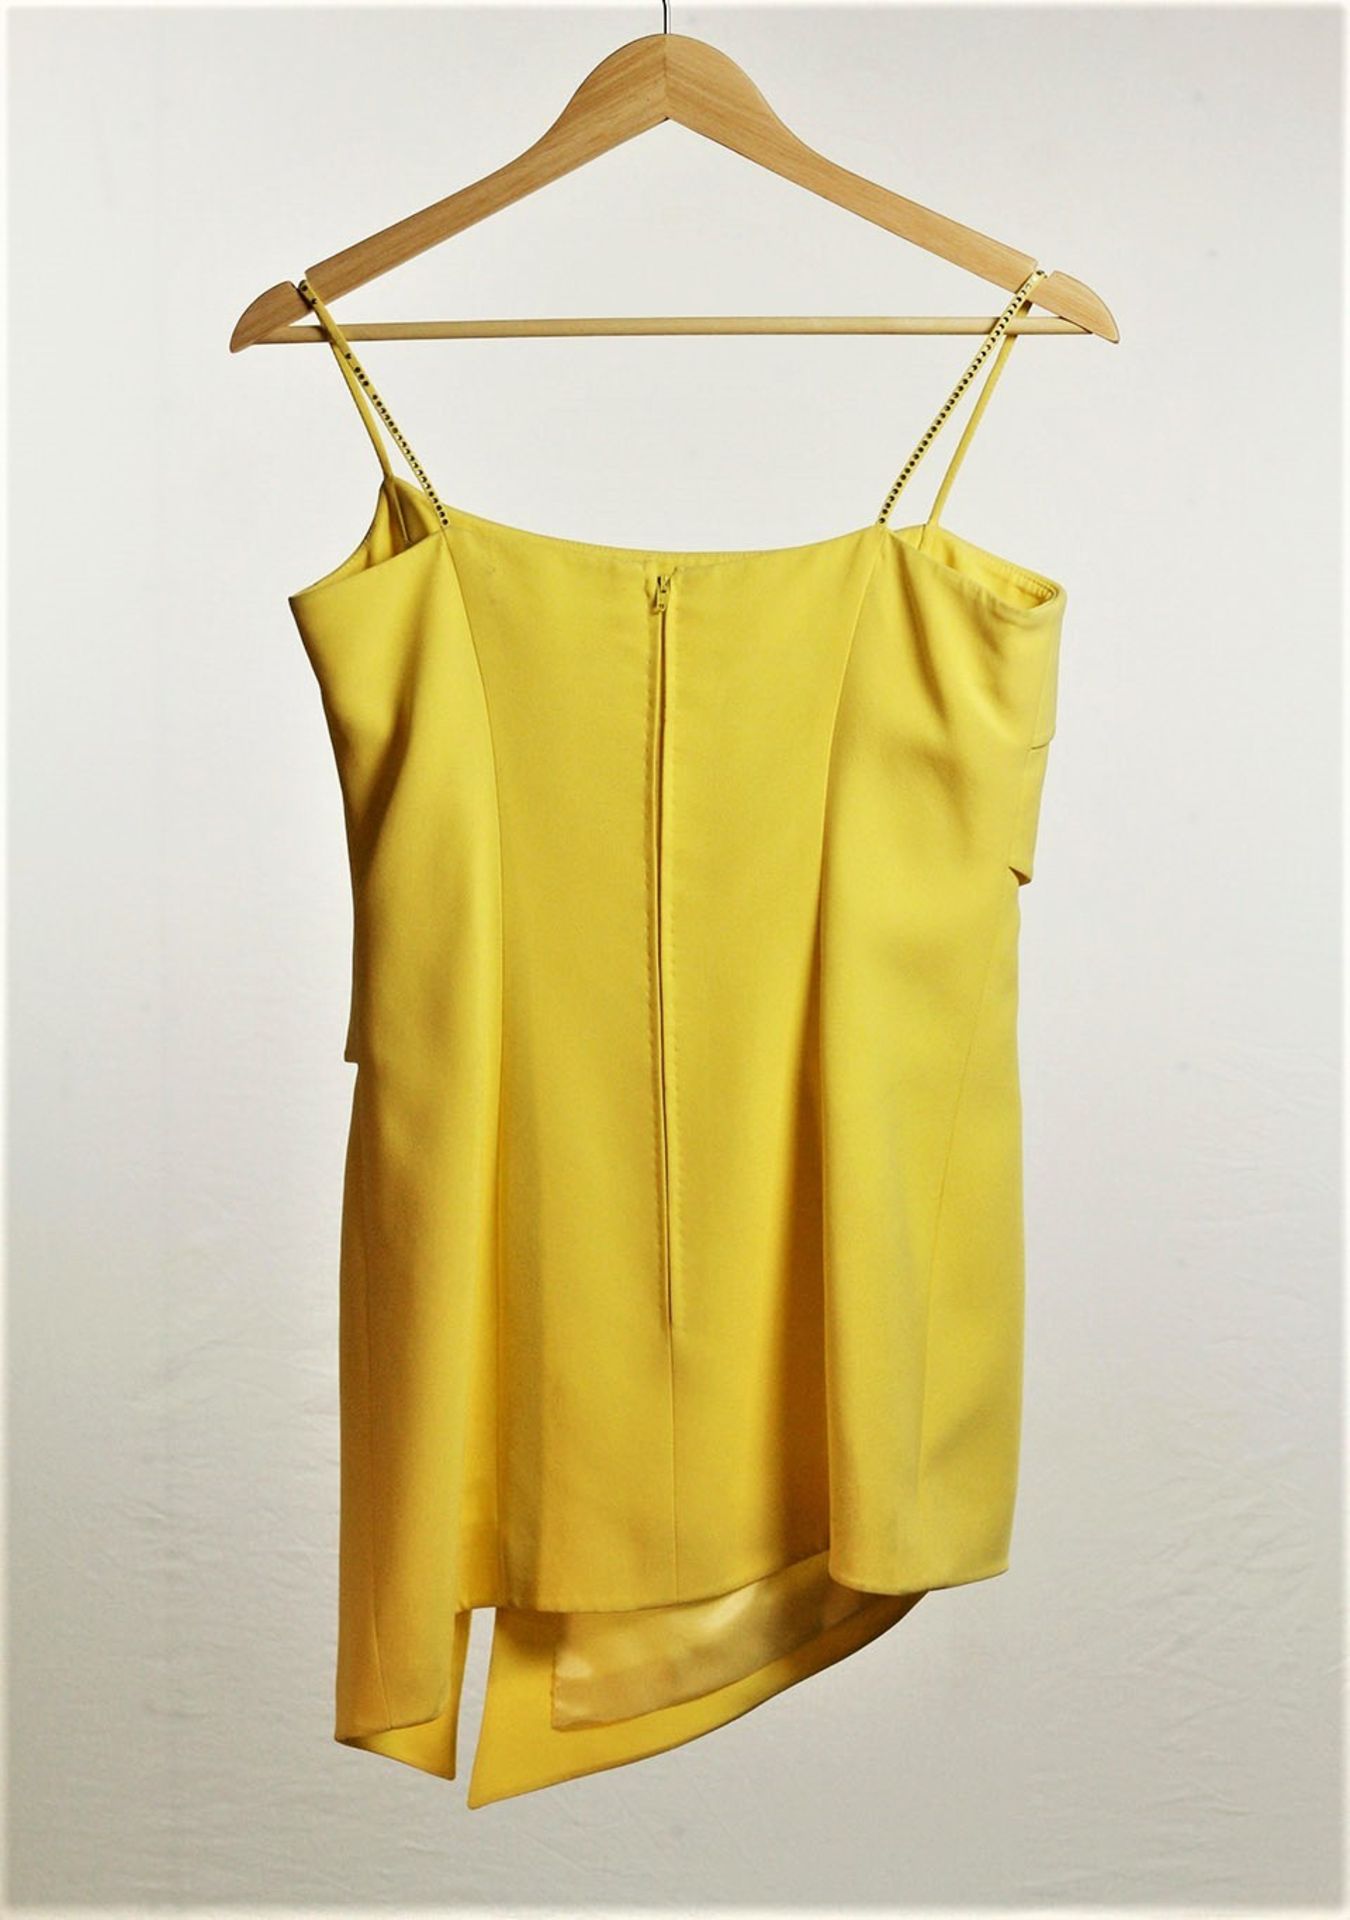 1 x Boutique Le Duc Yellow Dress - Size: 12 - Material: 68% Acetate, 32% Viscose - From a High End - Image 2 of 14